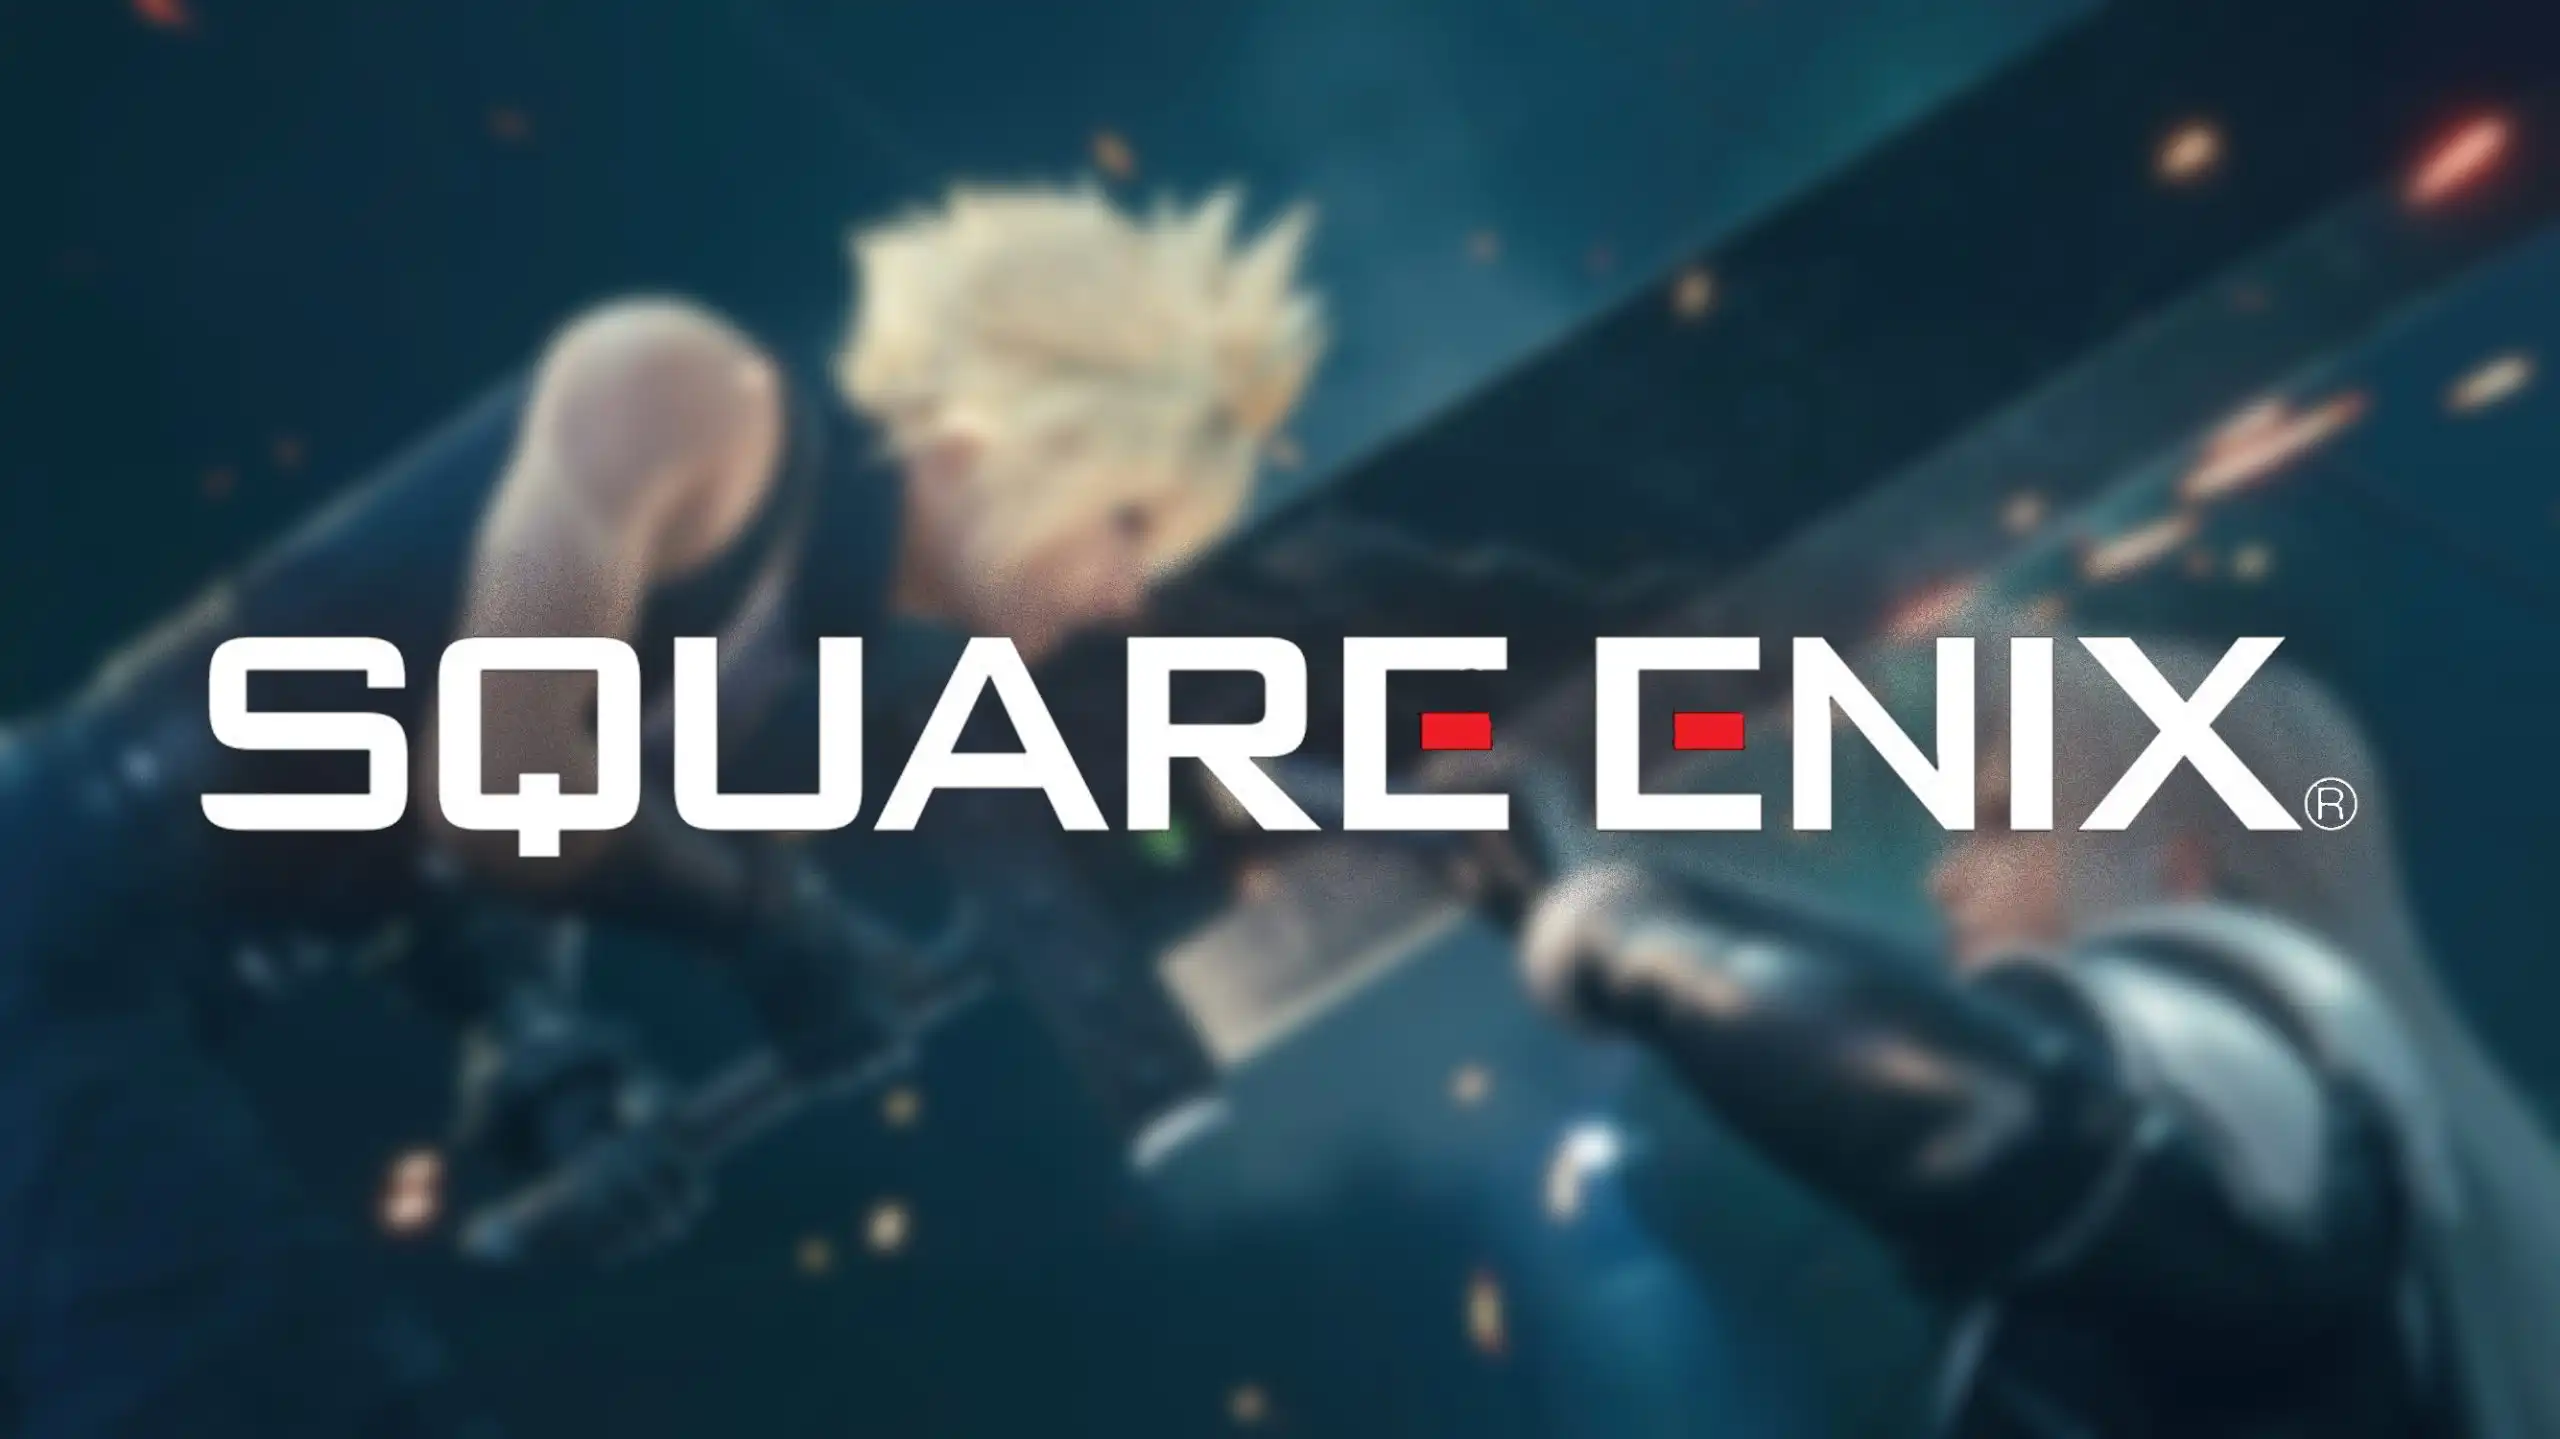 https://nftgames.net/wp-content/uploads/2023/03/Square-Enix-faces-backlash-from-gamers-over-the-launch-of-NFT-game.webp